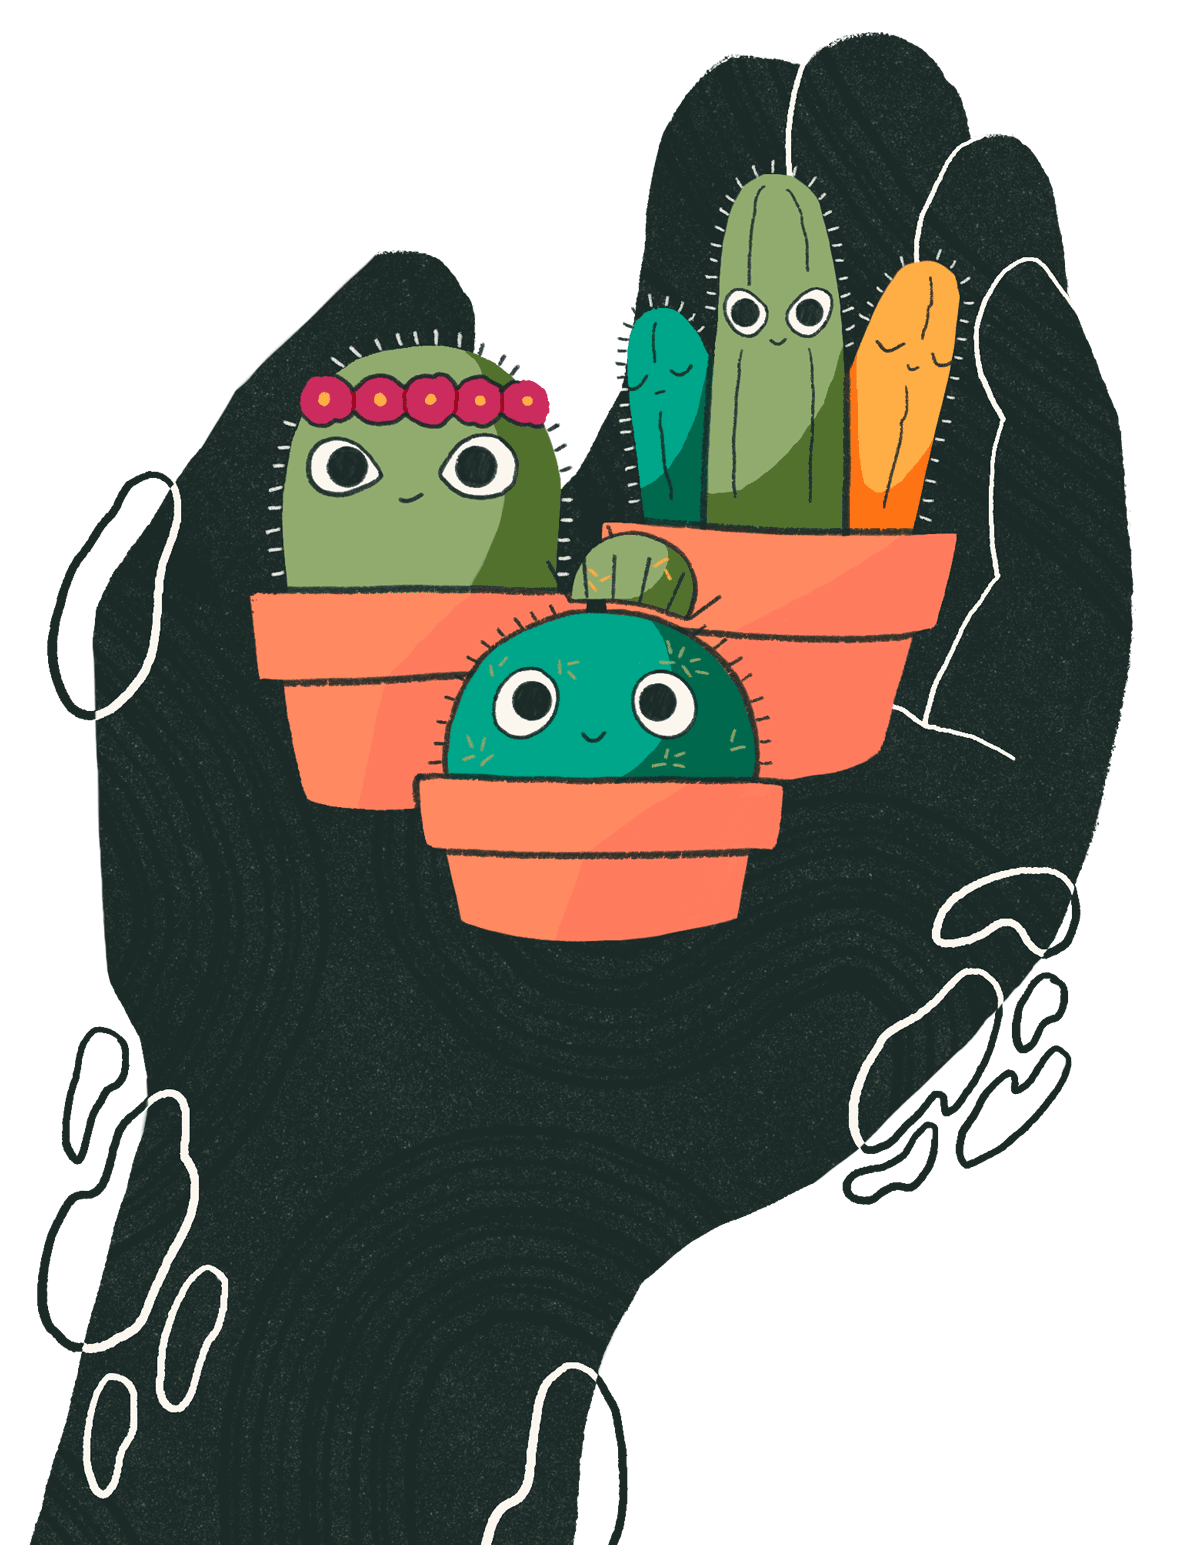 Three cactus characters resting comfortably in the palm of a large silhouetted hand.